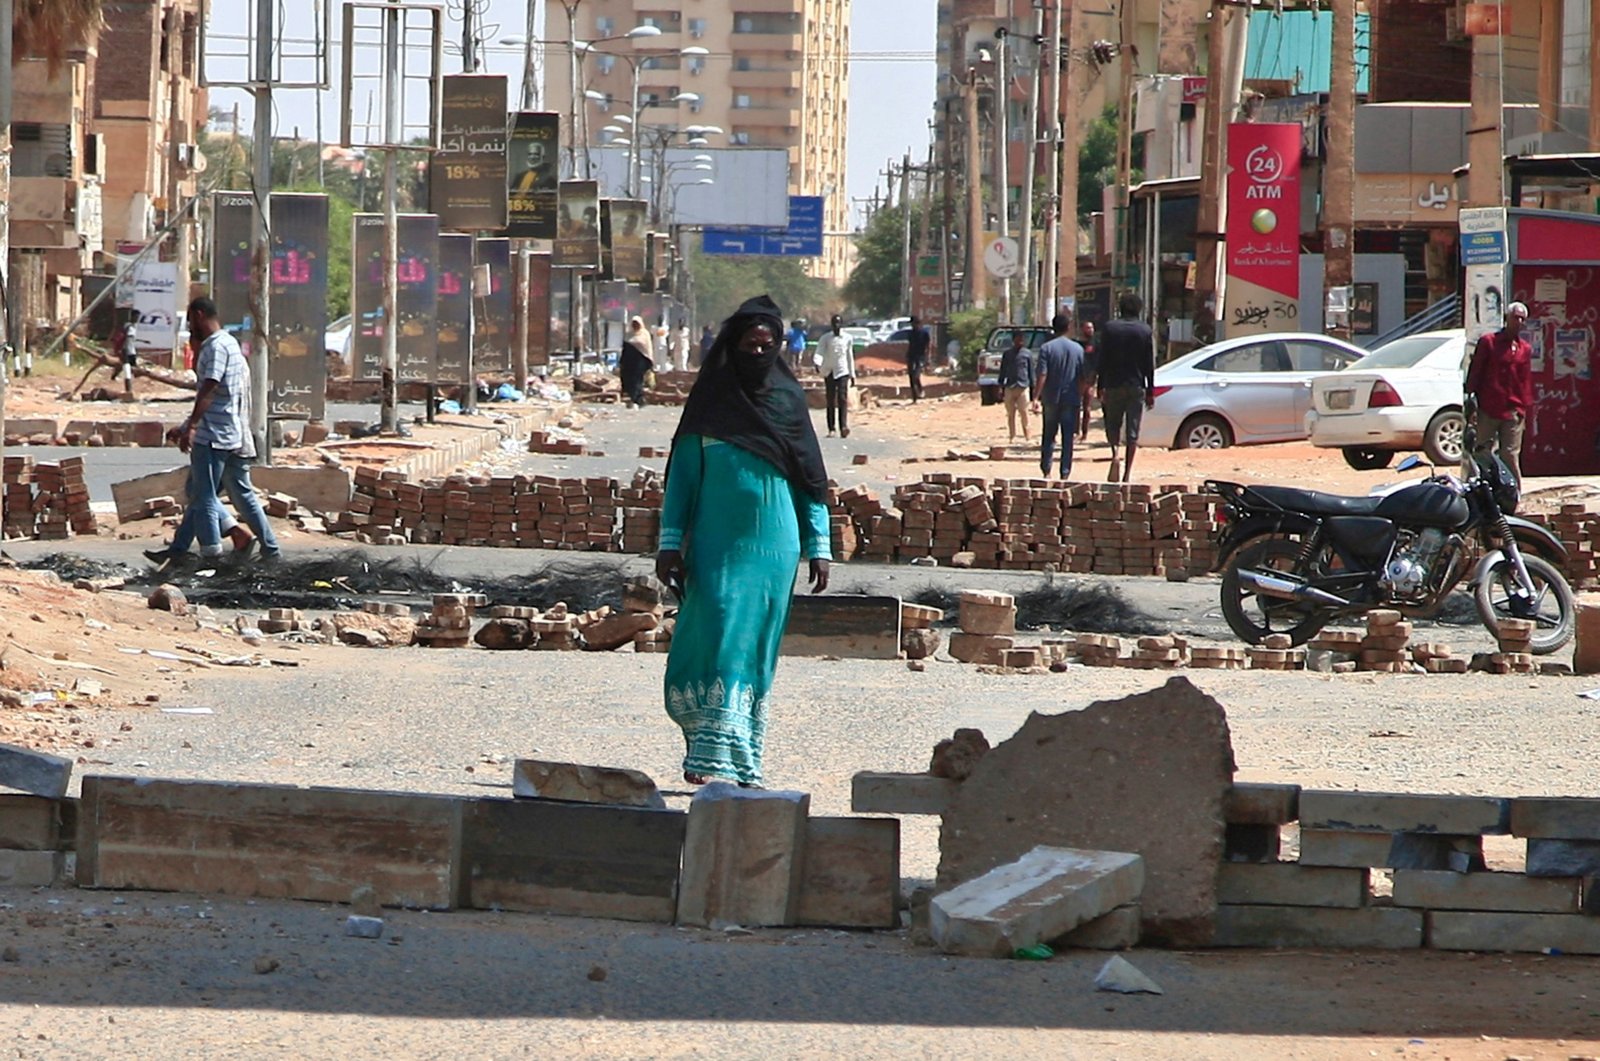 Sudanese anti-coup protesters use bricks to barricade a street in the capital Khartoum on Oct. 27, 2021, amid ongoing demonstrations against a military takeover that has sparked widespread international condemnation. (AFP Photo)